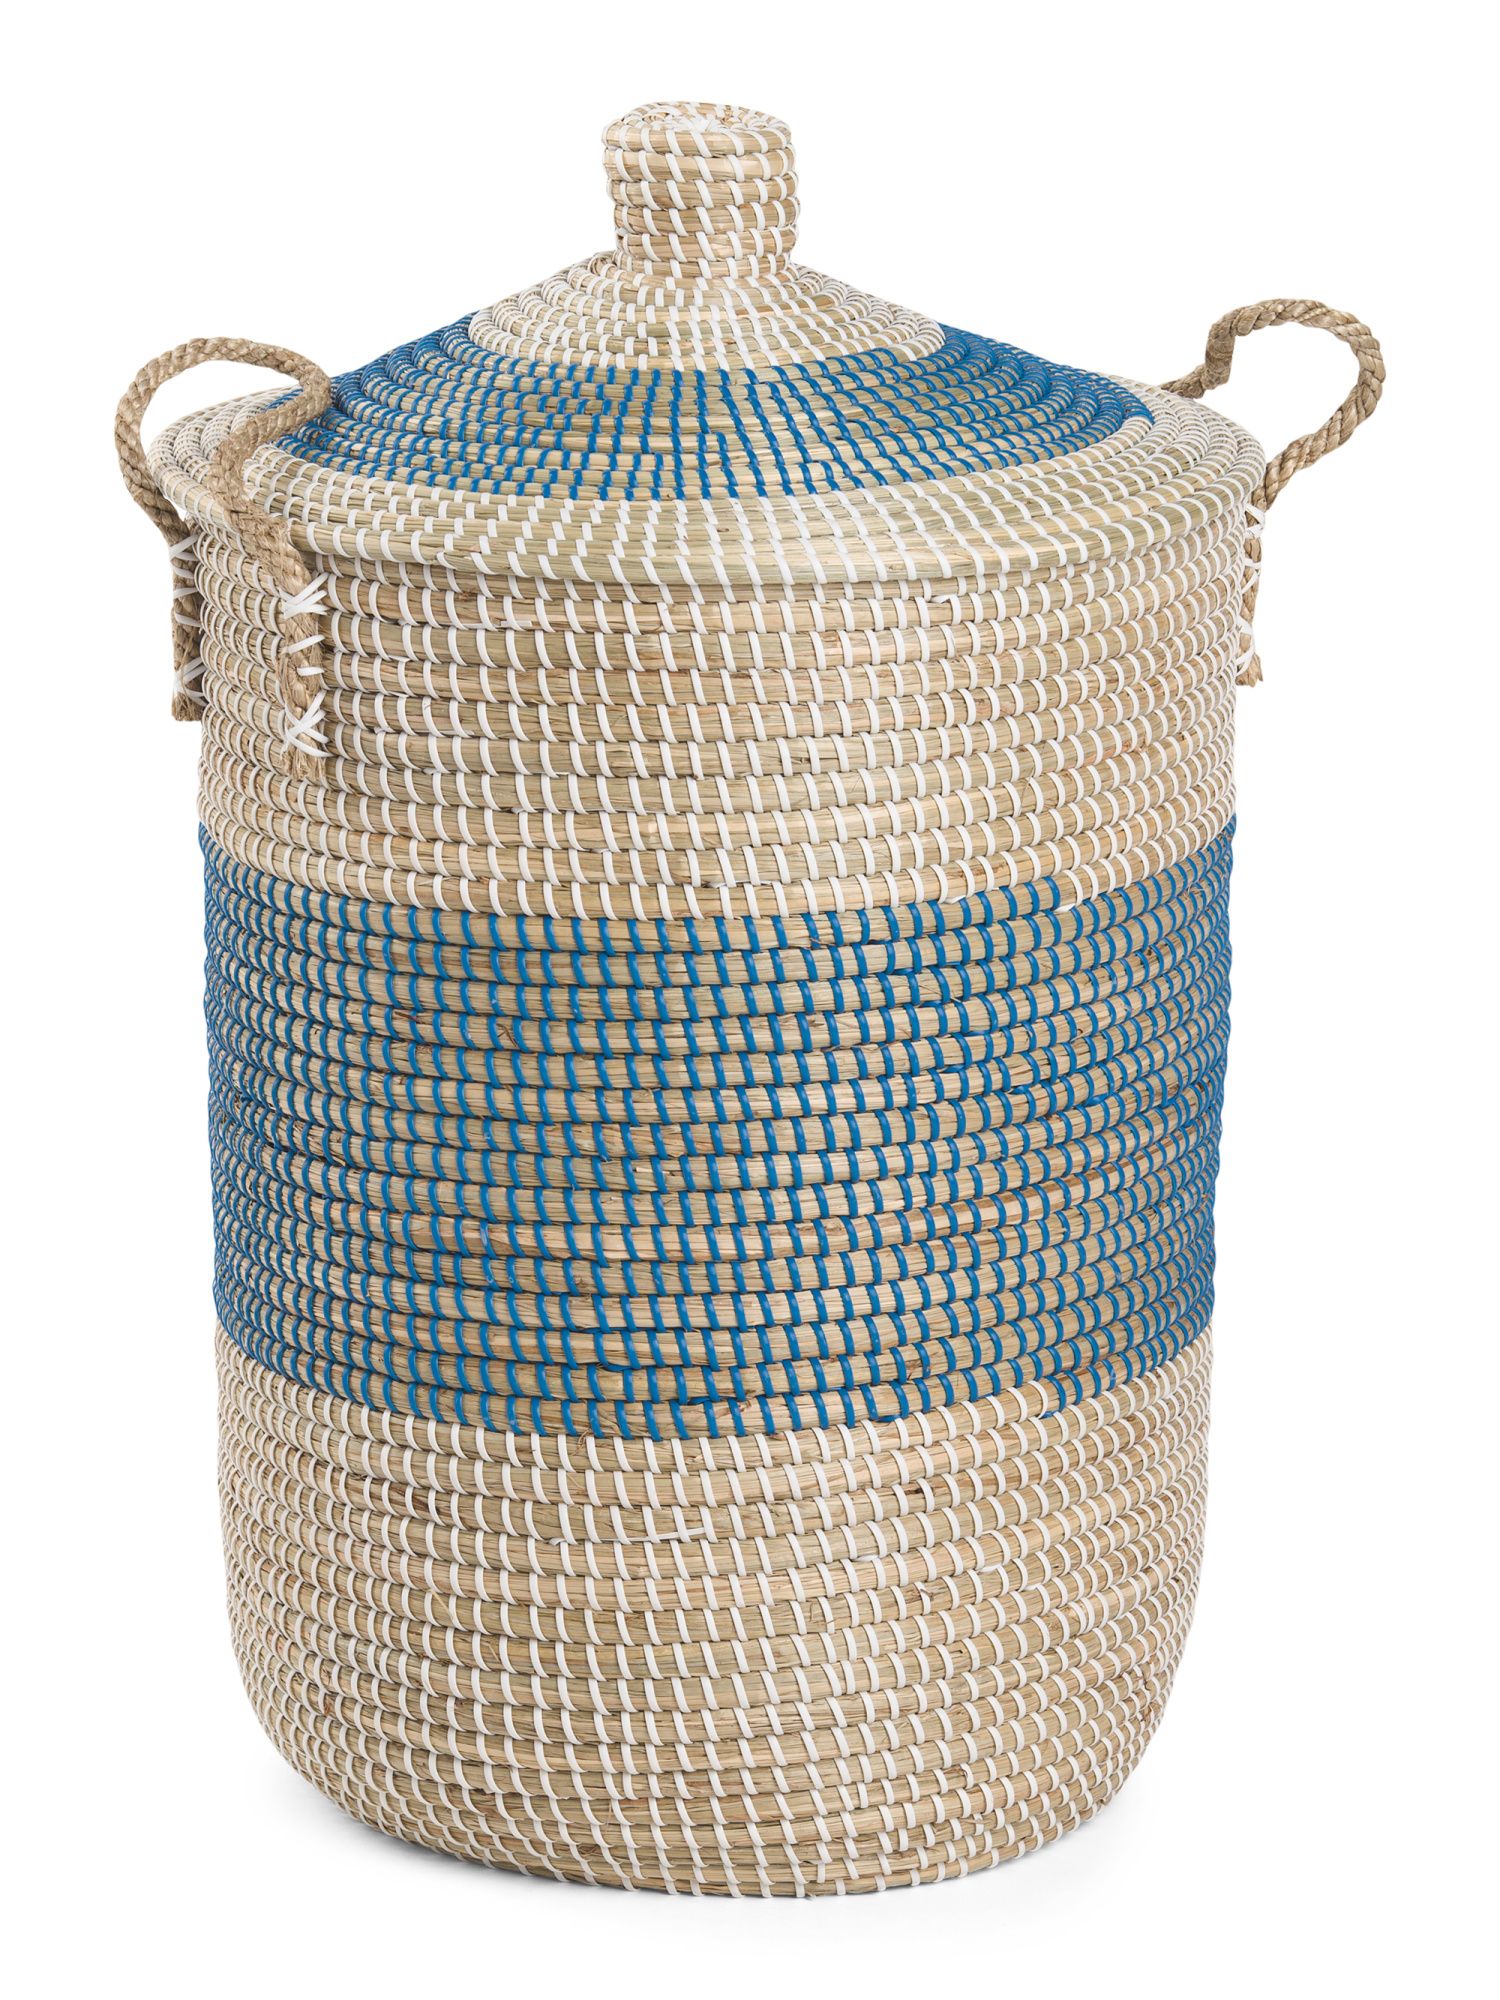 Large Striped Round Hamper With Rope Handles | TJ Maxx